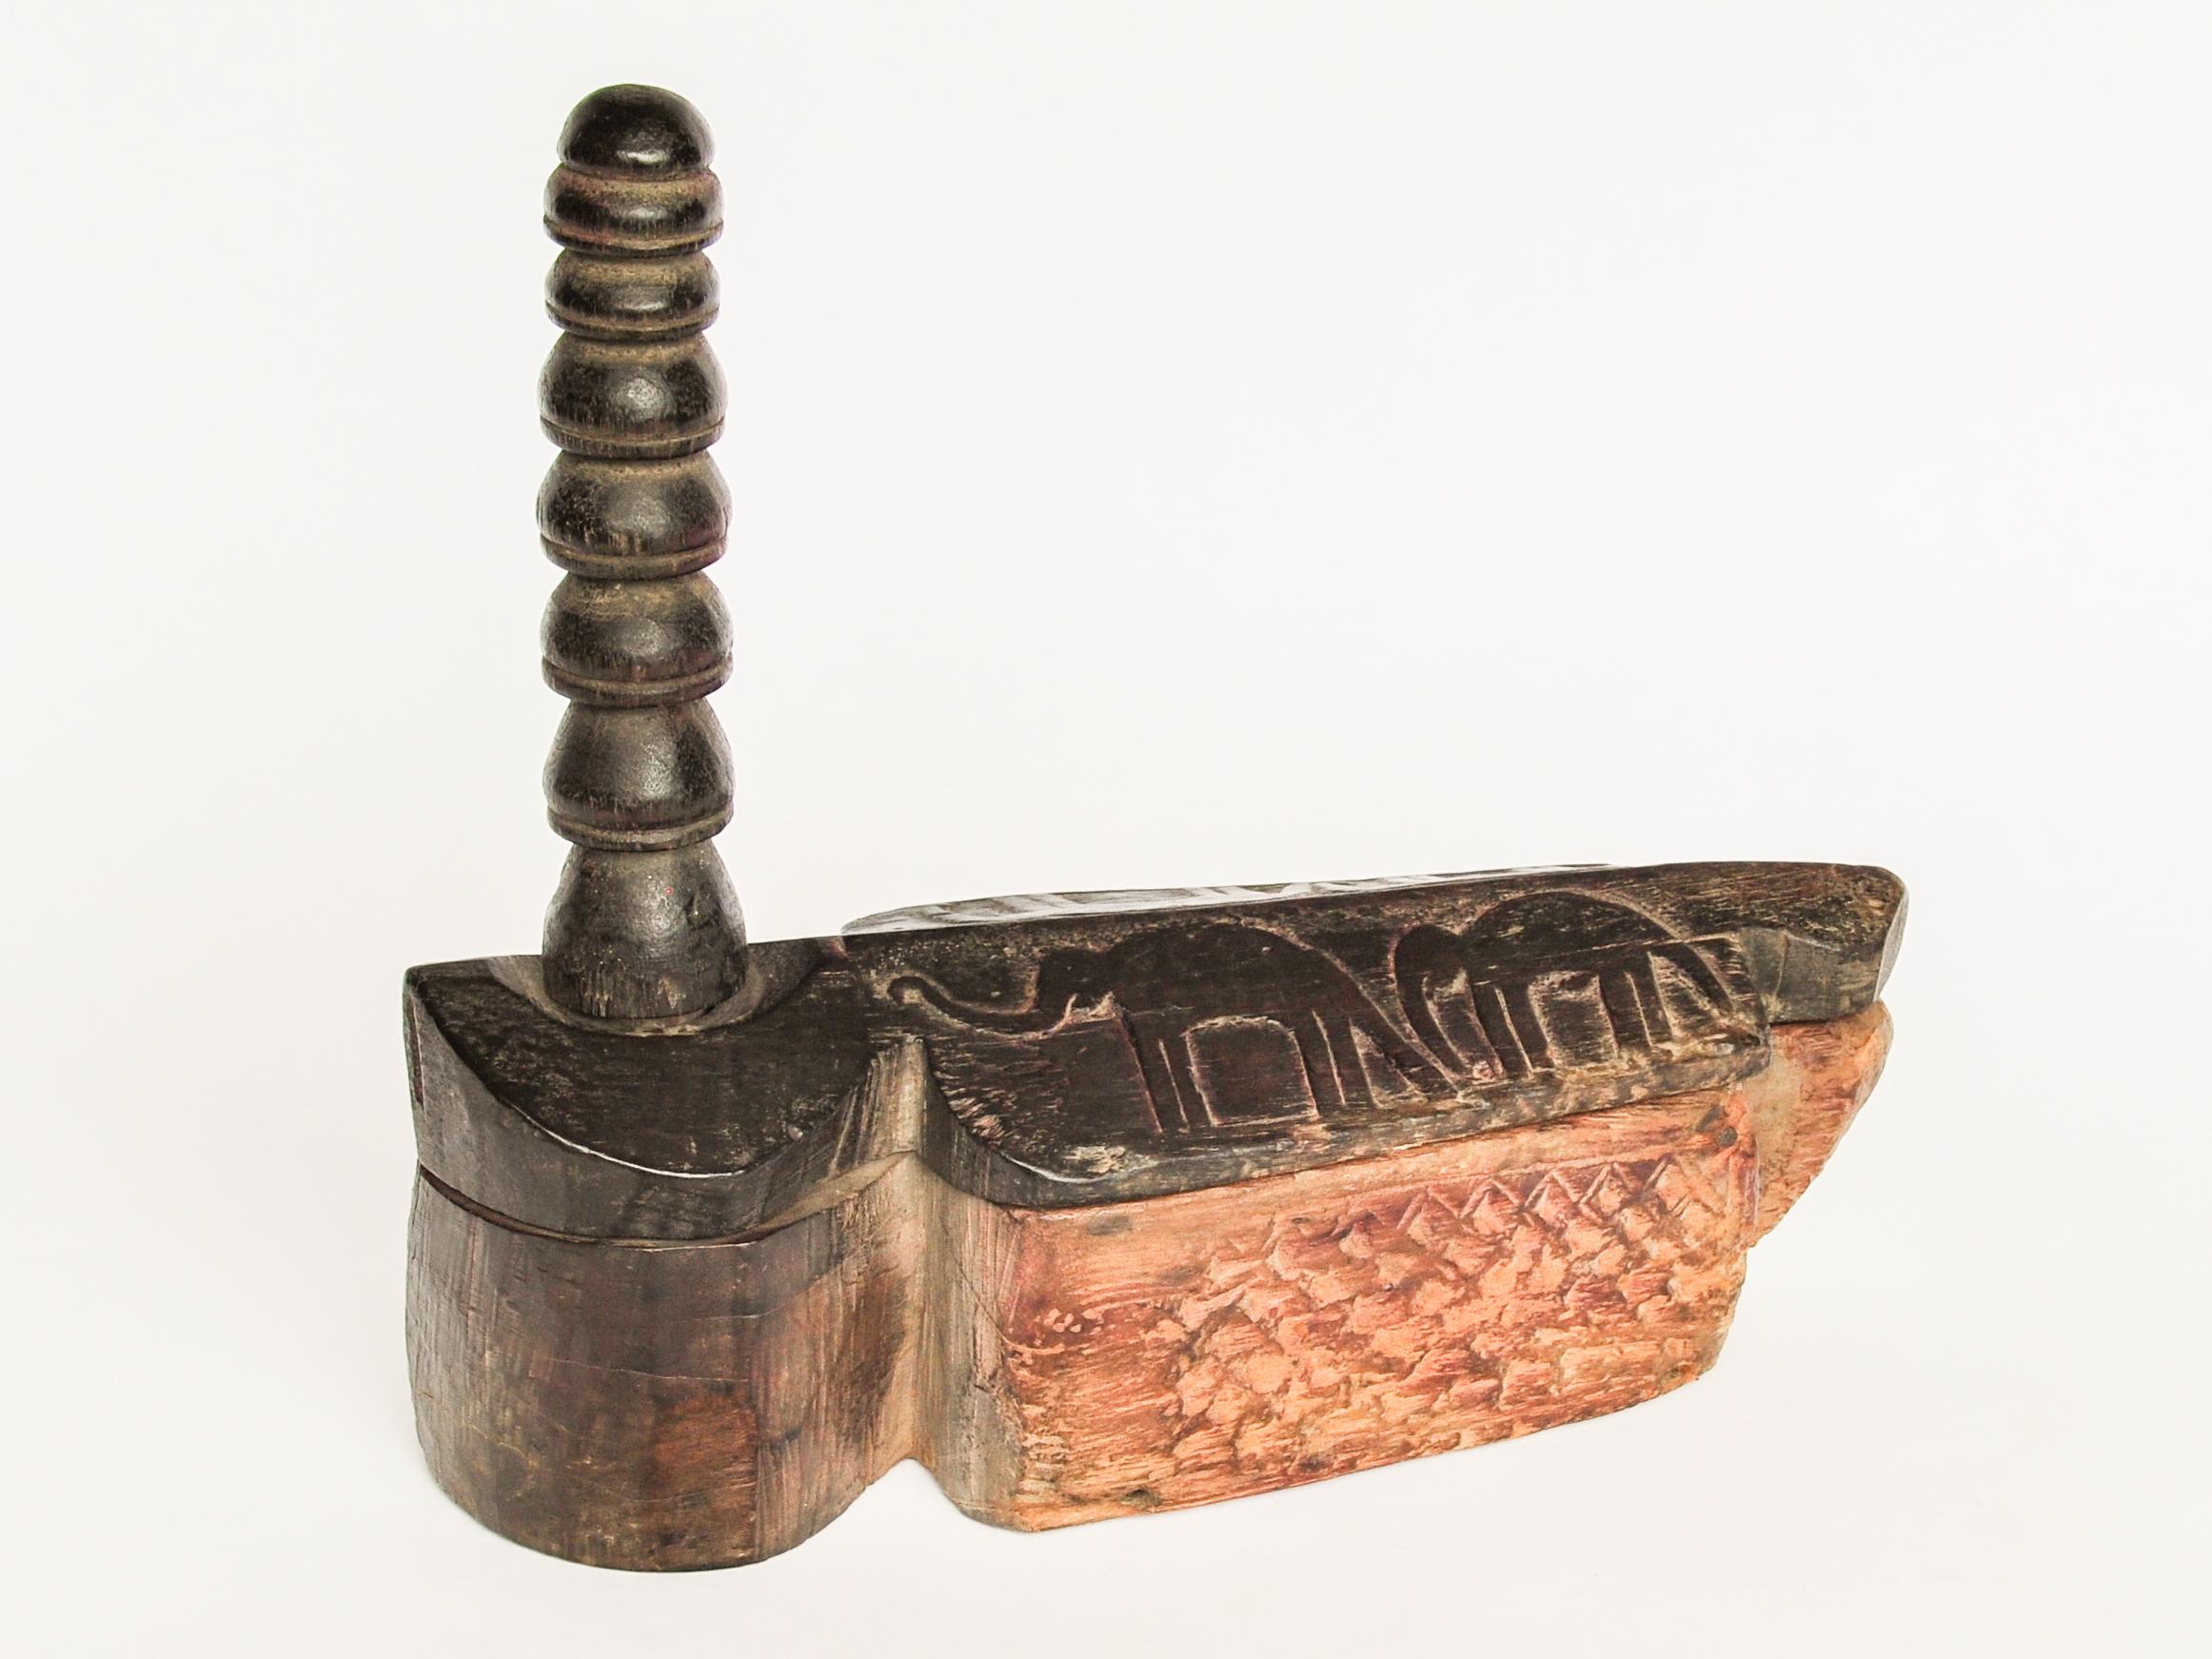 Hand-carved lidded wooden spice box with elephant motifs. From the Tharu of Nepal. Mid-20th century.
This charming spice box comes from the Tharu of southern Nepal. It is hand-carved of a dense local wood, with geometric patterns on the side, and